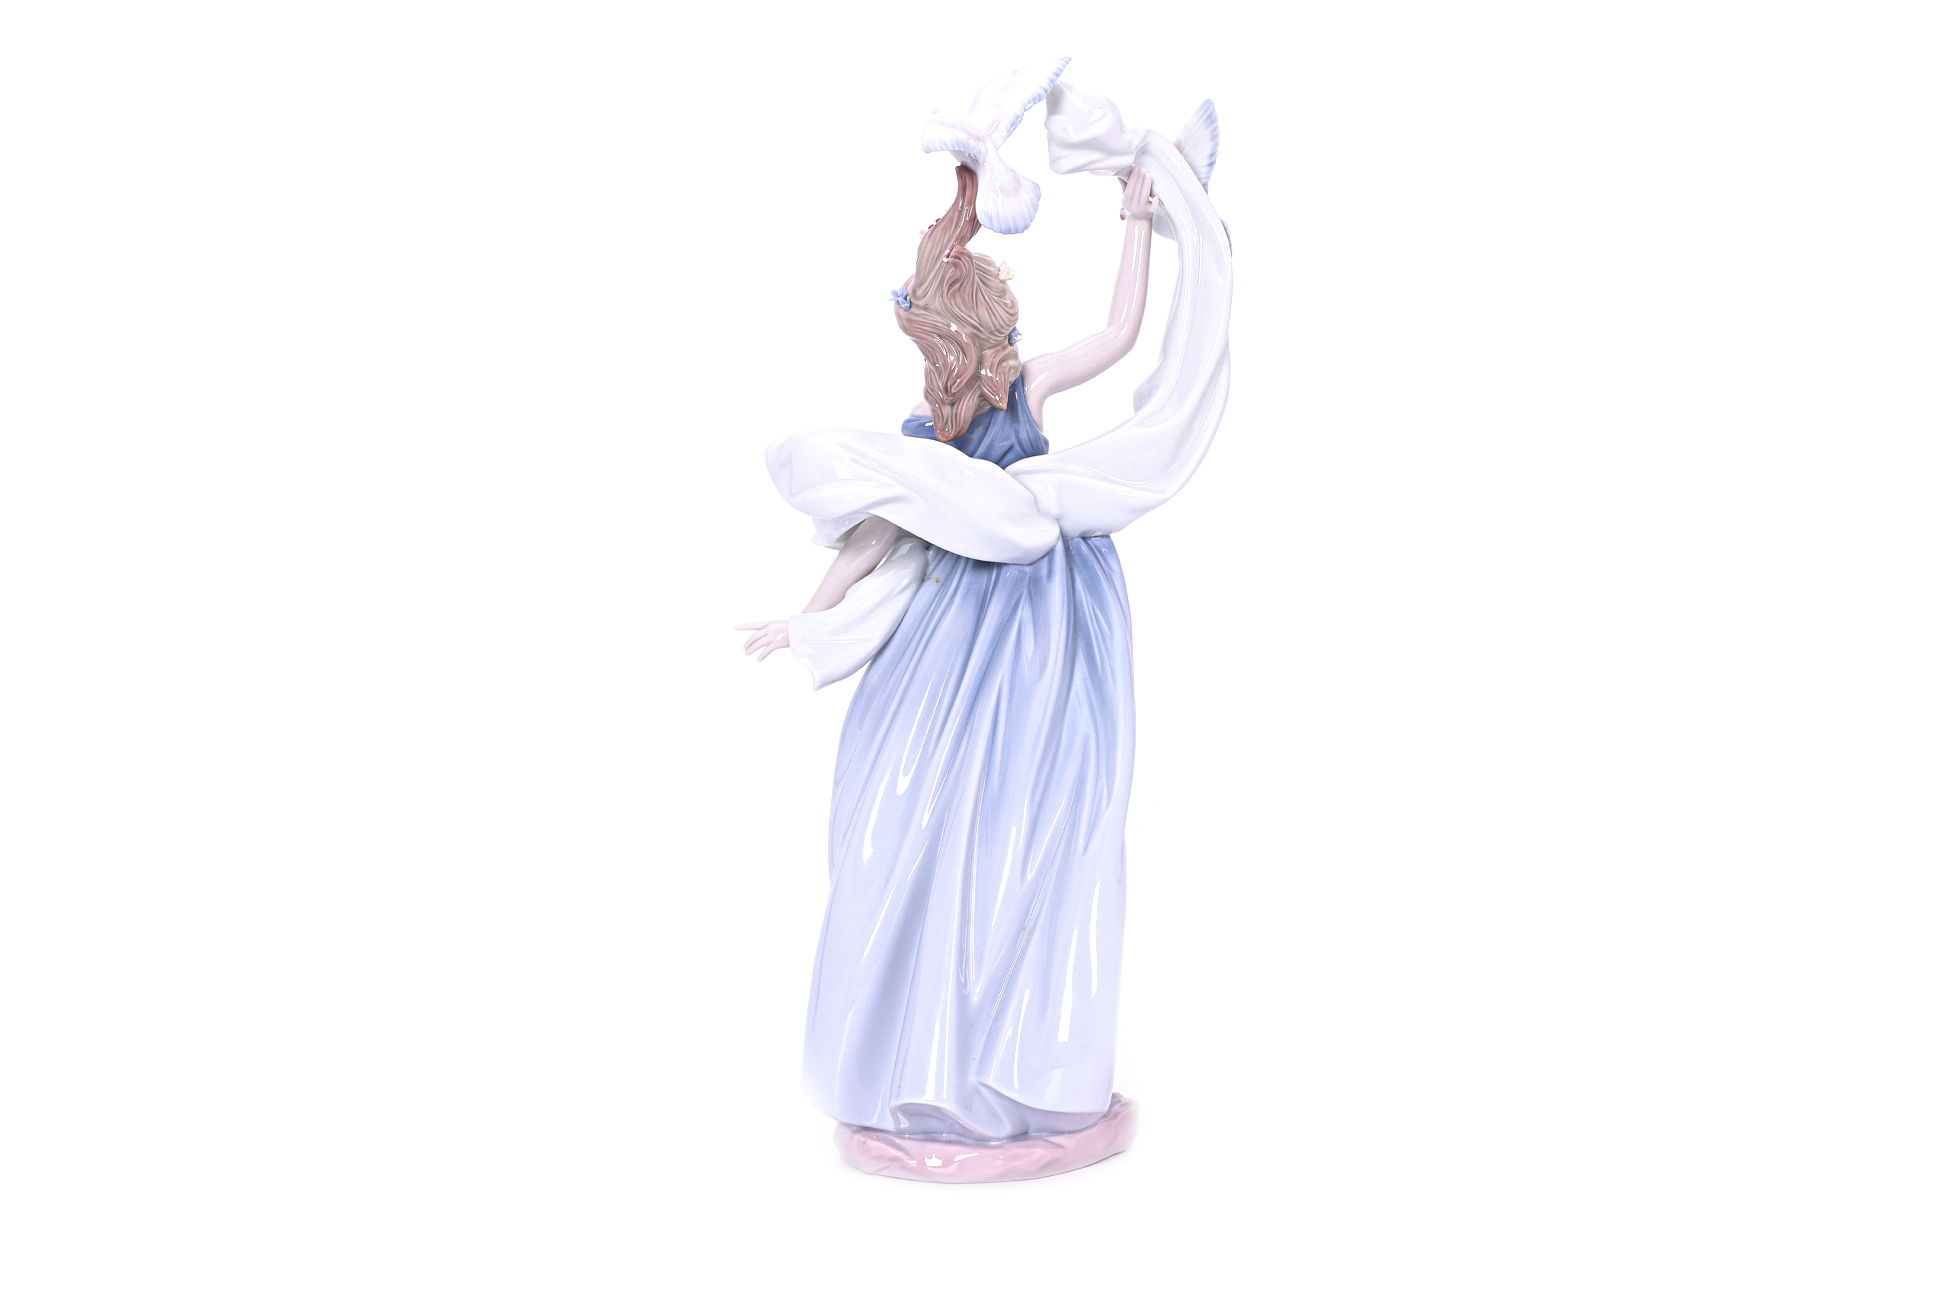 A LLADRO NEW HORIZONS PORCELAIN FIGURINE - Image 2 of 3